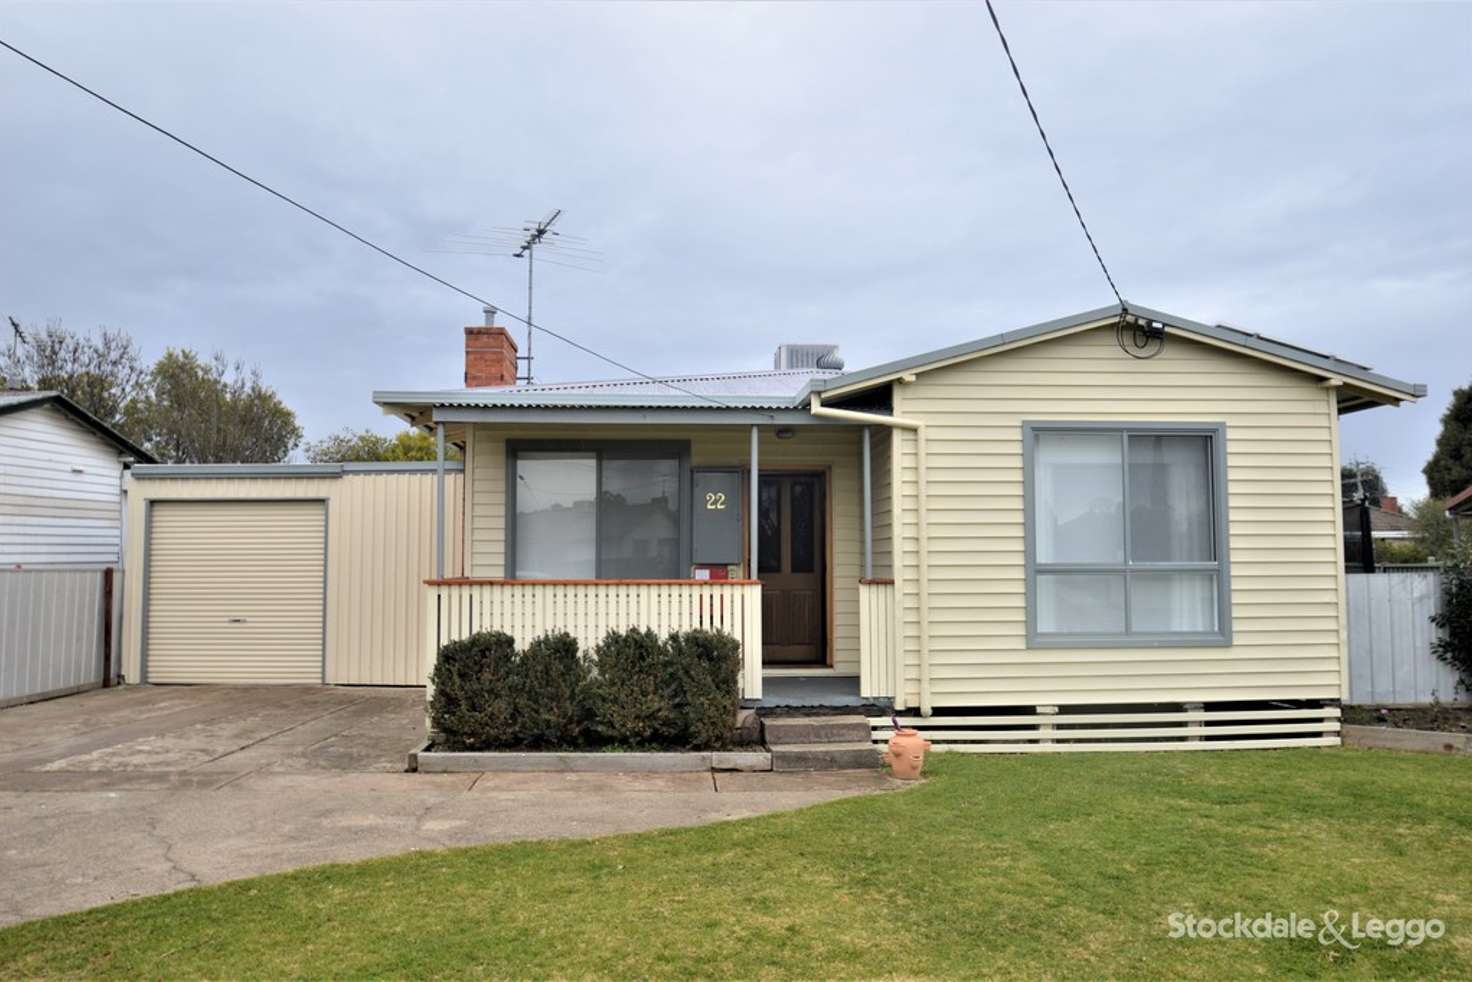 Main view of Homely house listing, 22 Batchelor Crs, Wangaratta VIC 3677